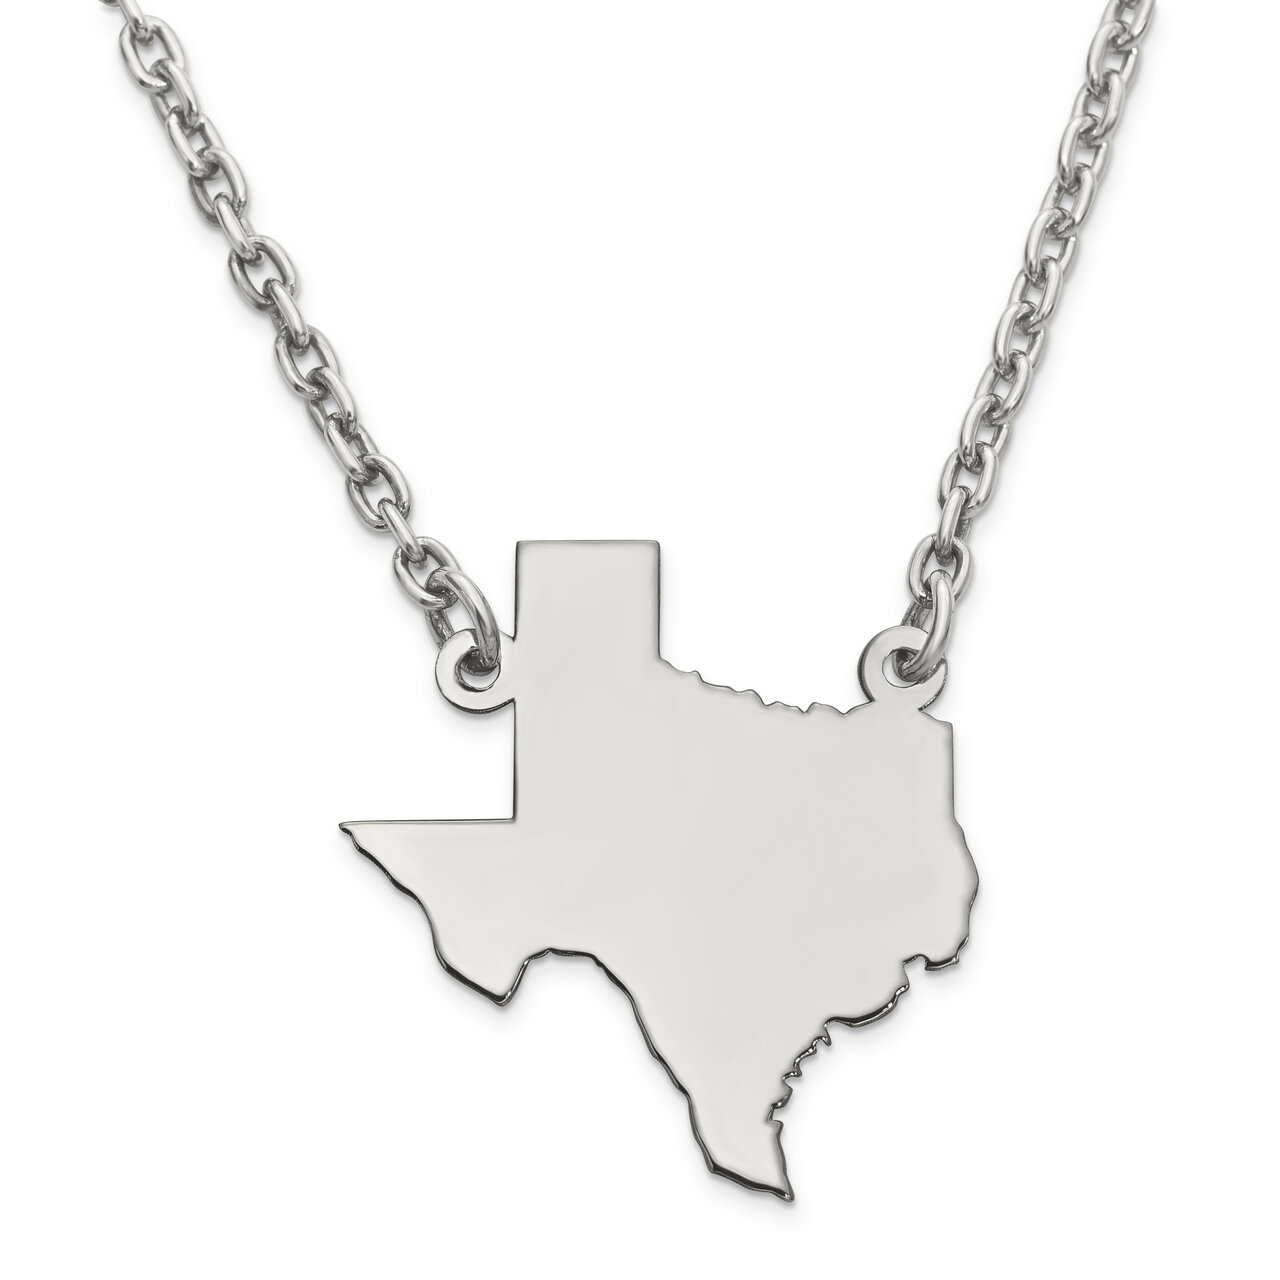 Texas State Pendant Necklace with Chain Sterling Silver Engravable XNA706SS-TX